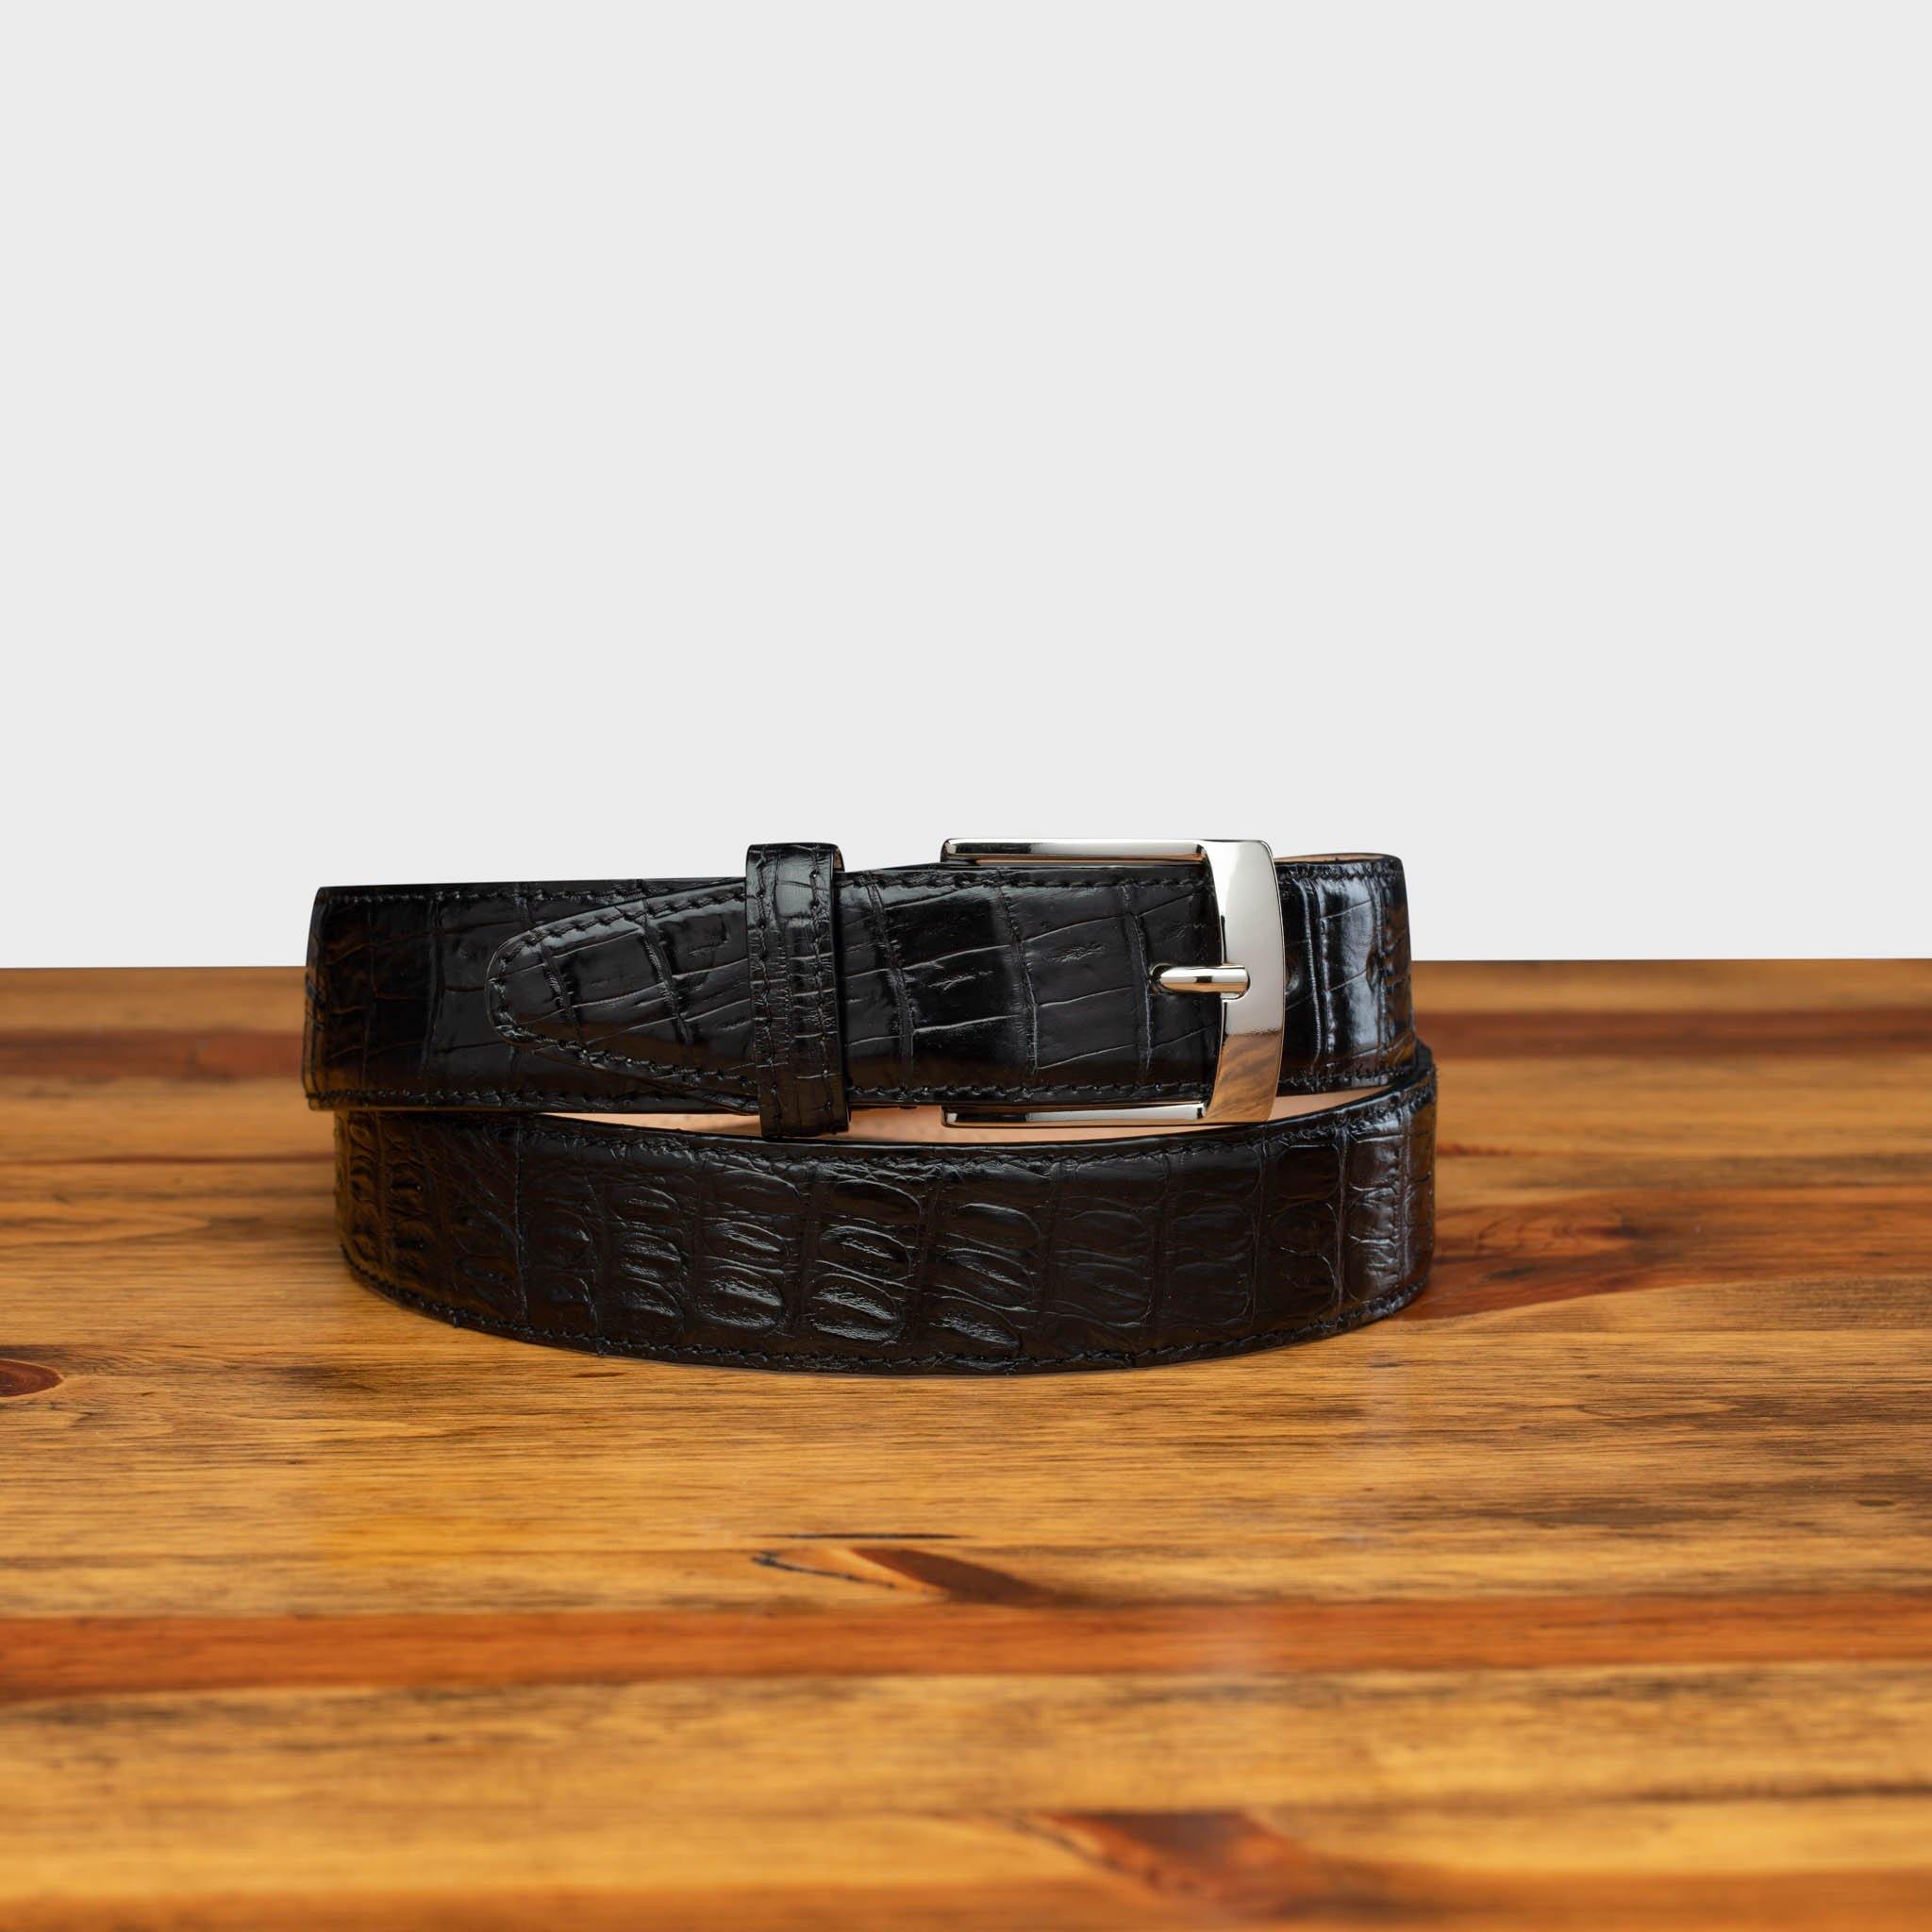 Front profile of C7981 Calzoleria Toscana Black Exotic Hornback Belt on top of a wooden  table